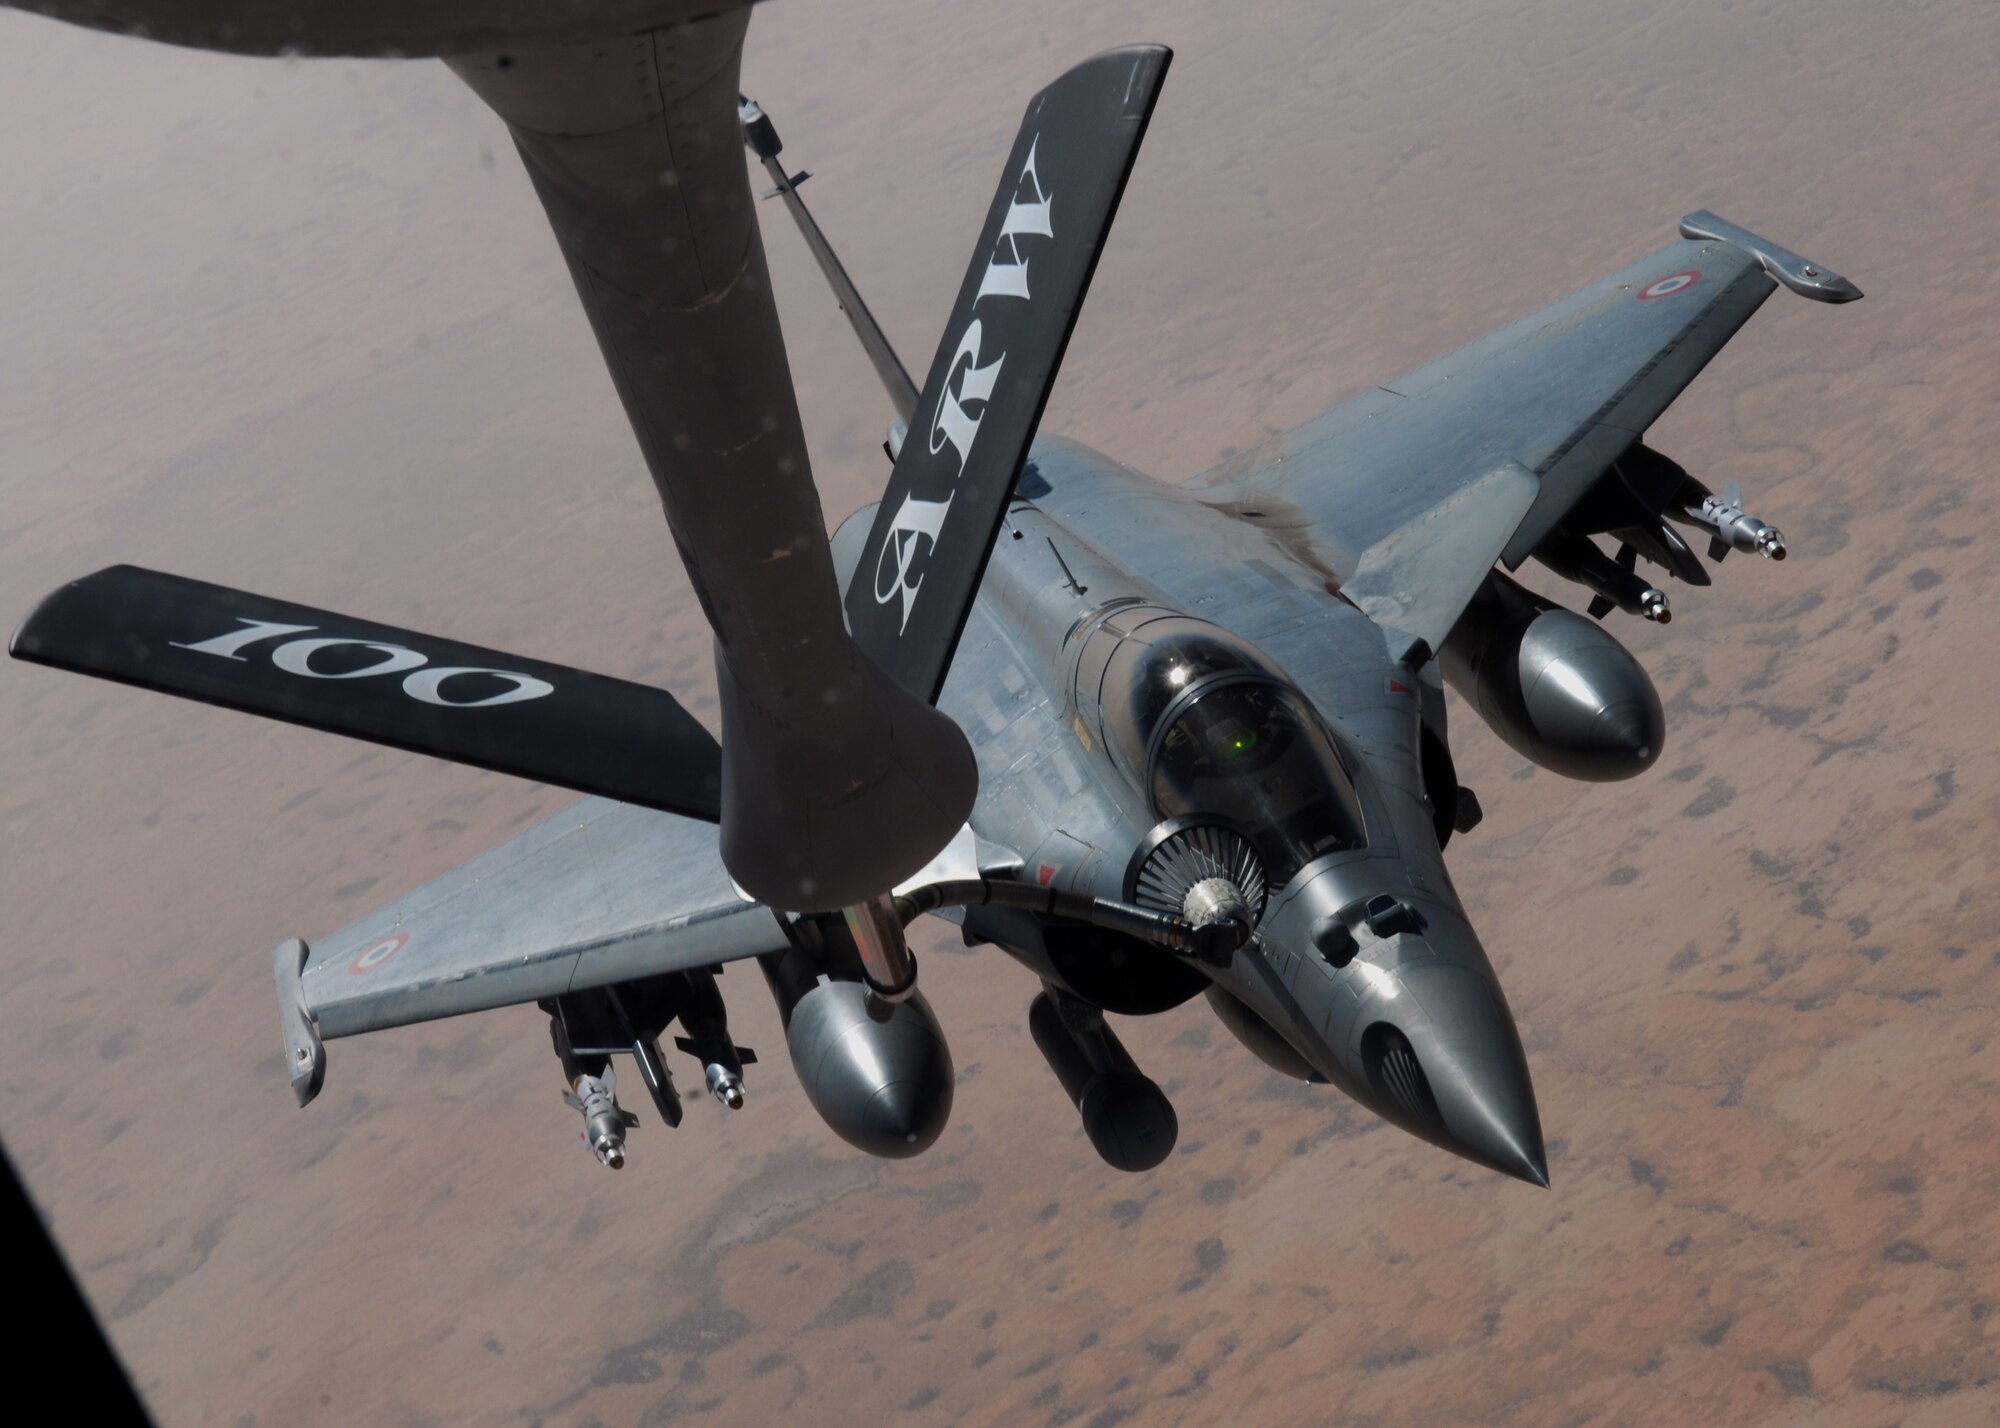 The 351st Expeditionary Air Refueling Wing refuels French Rafale fighter aircraft April 23, 2013, over Mali. The 351st’s Stratotankers have been flying refueling sorties for the French since Jan. 27, 2013, to allow their aircraft to fly close-air-support sorties for troops on the ground in Mali. (U.S. Air Force photo by 1st Lt. Christopher Mesnard/Released)